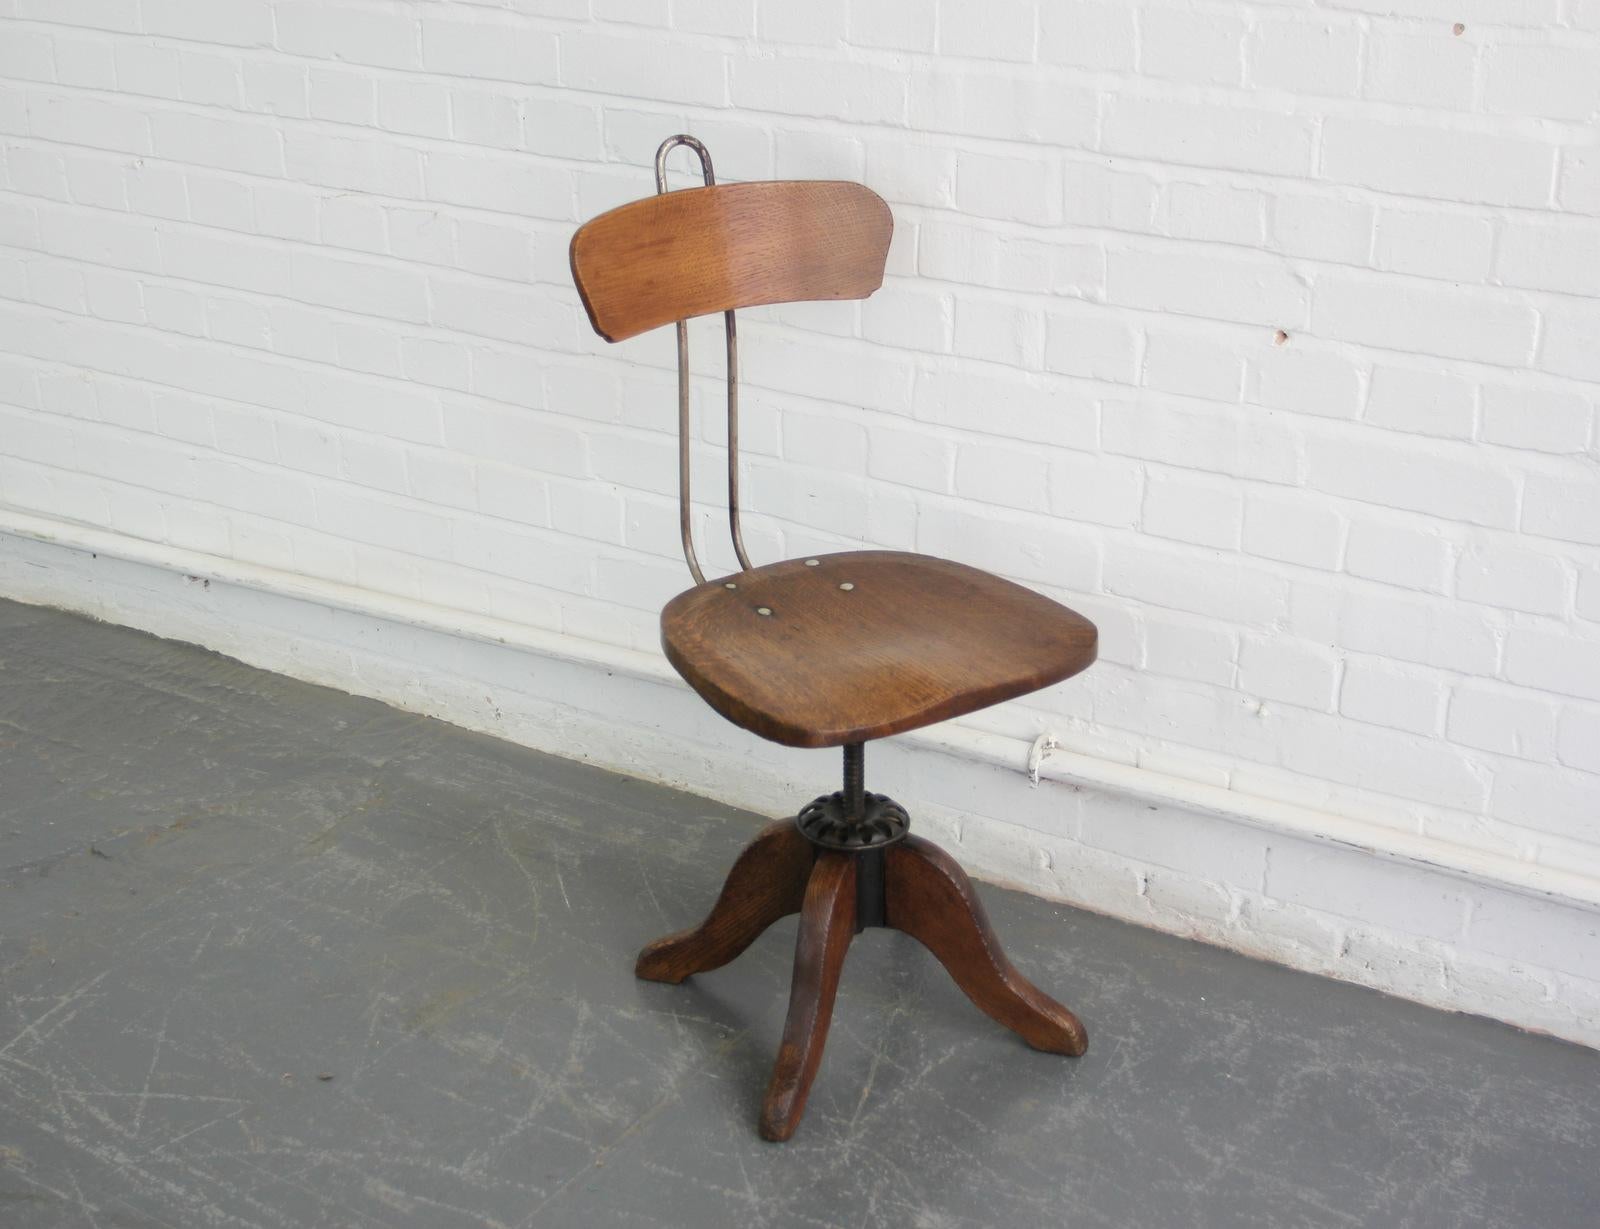 Industrial Early 20th Century Oak Machinists Chair, circa 1900